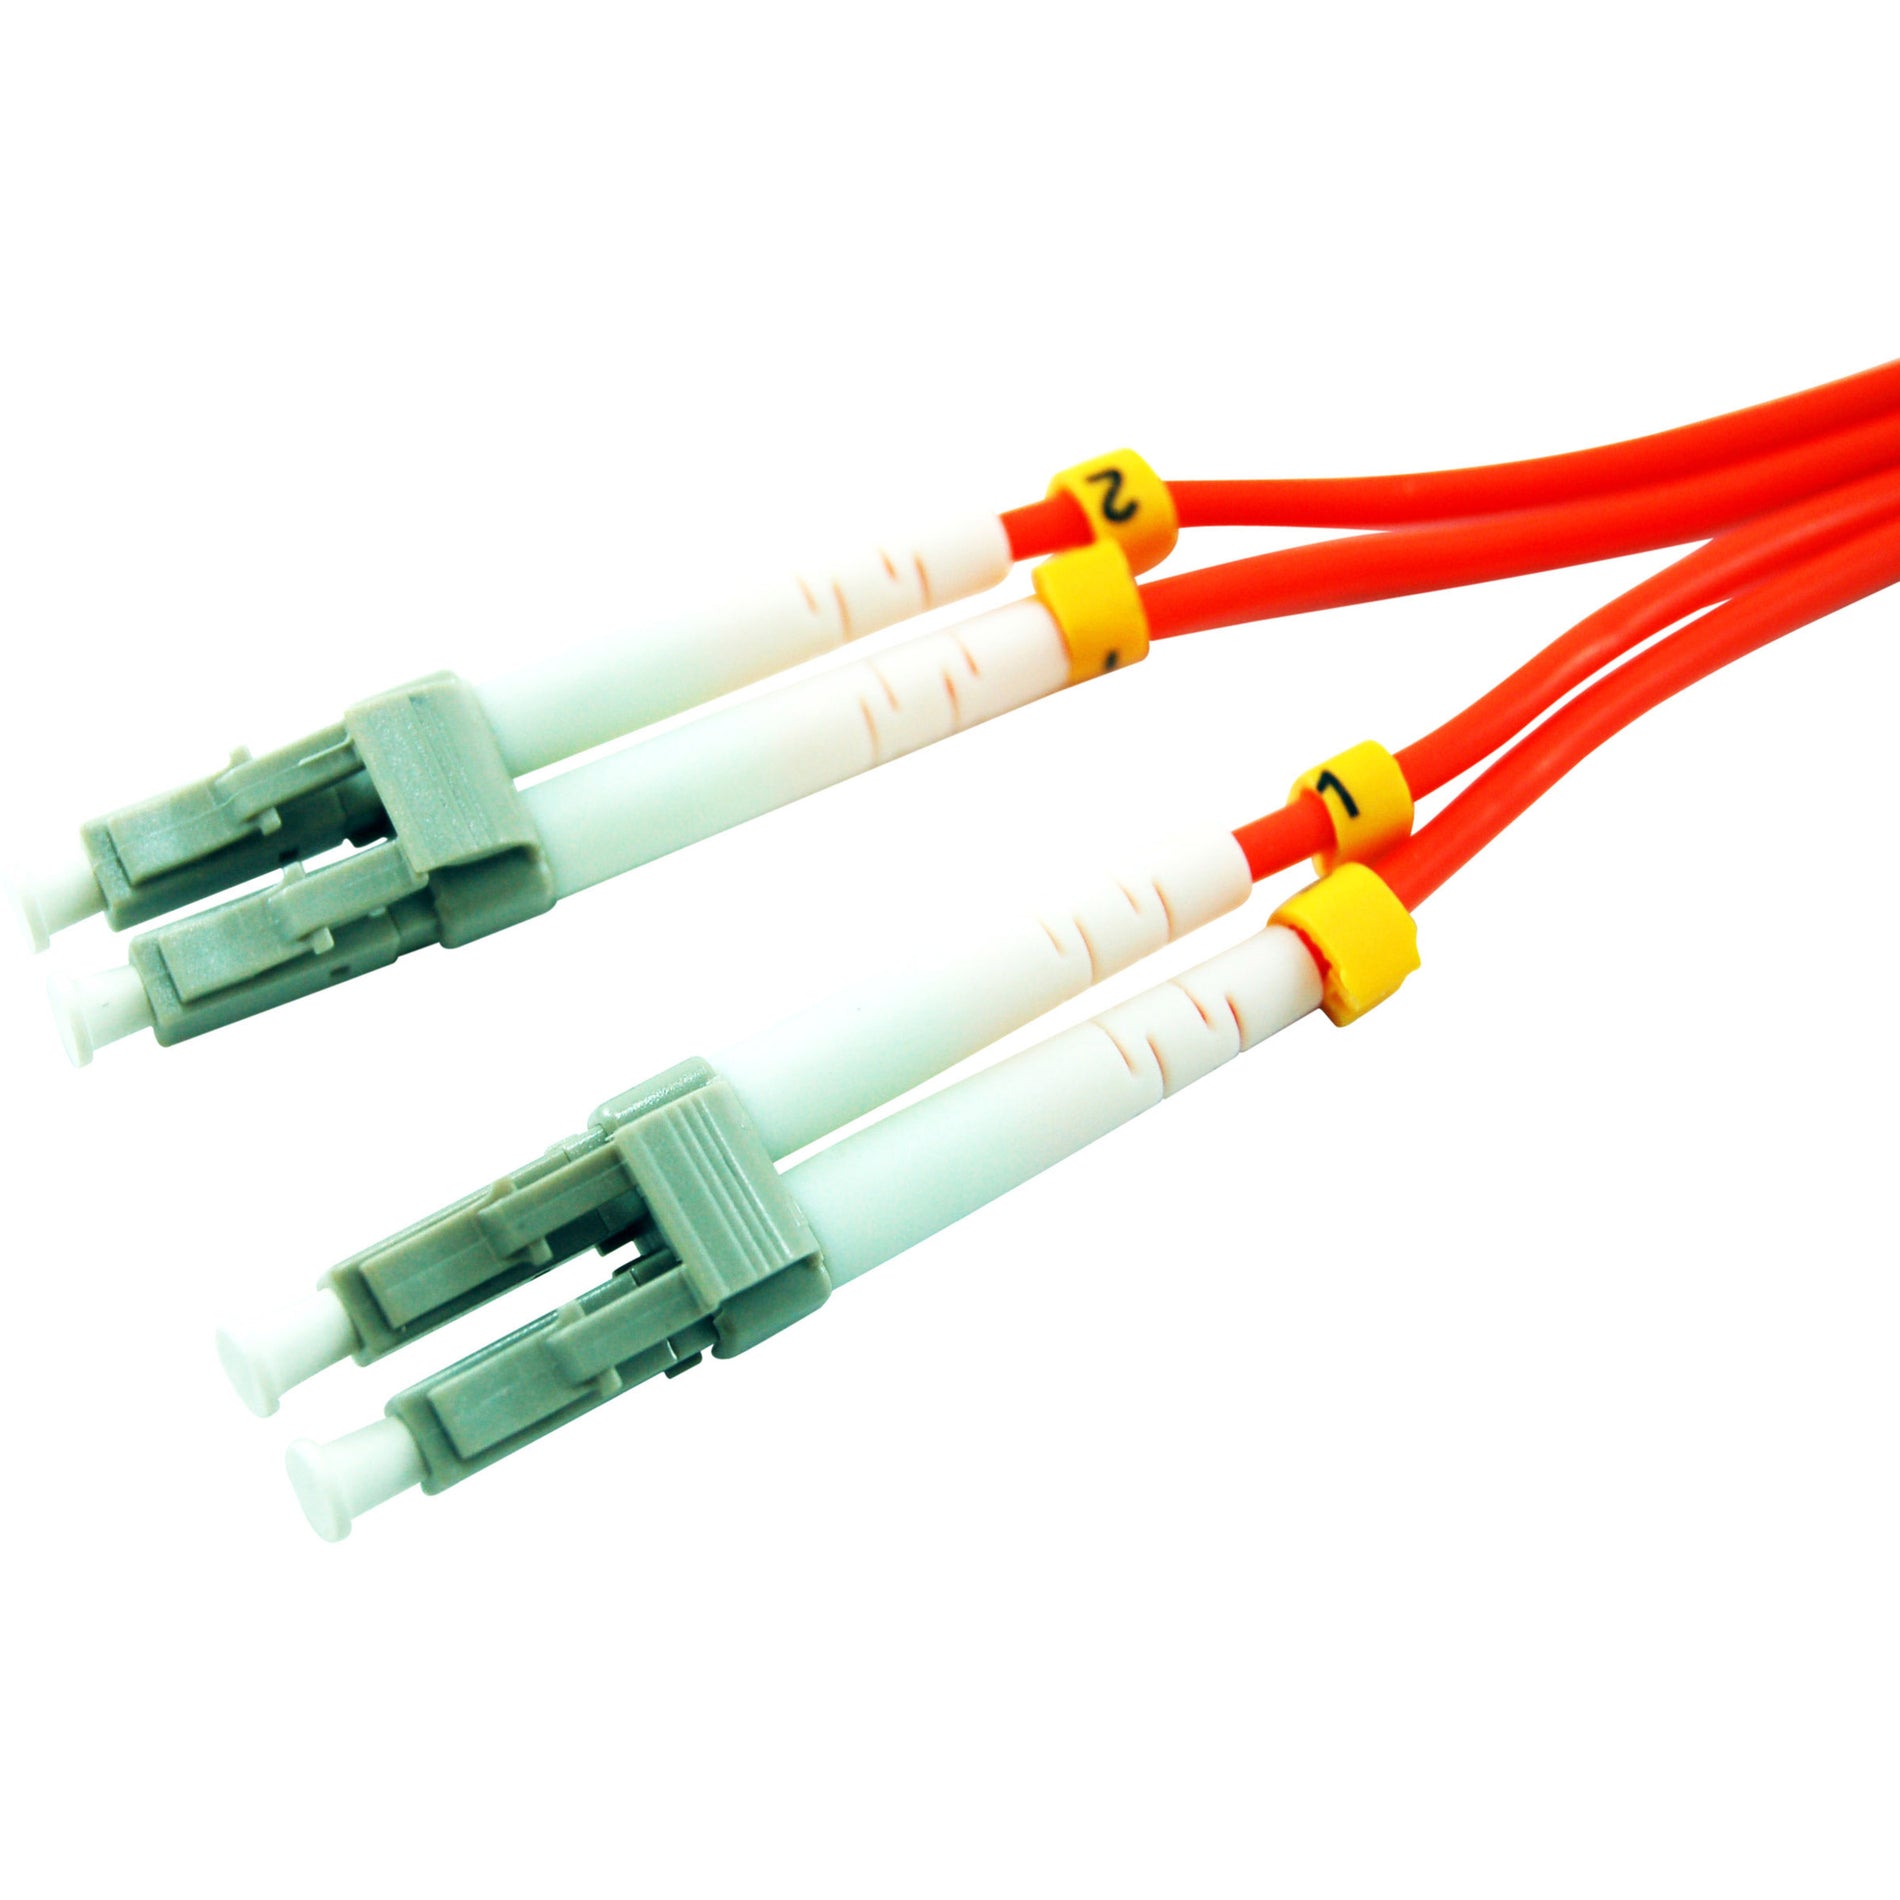 Comprehensive LC-LC-MM-2M 2M LC Multimode 3.0mm Duplex Network Cable, Riser Rated, 1 Gbit/s Data Transfer Rate